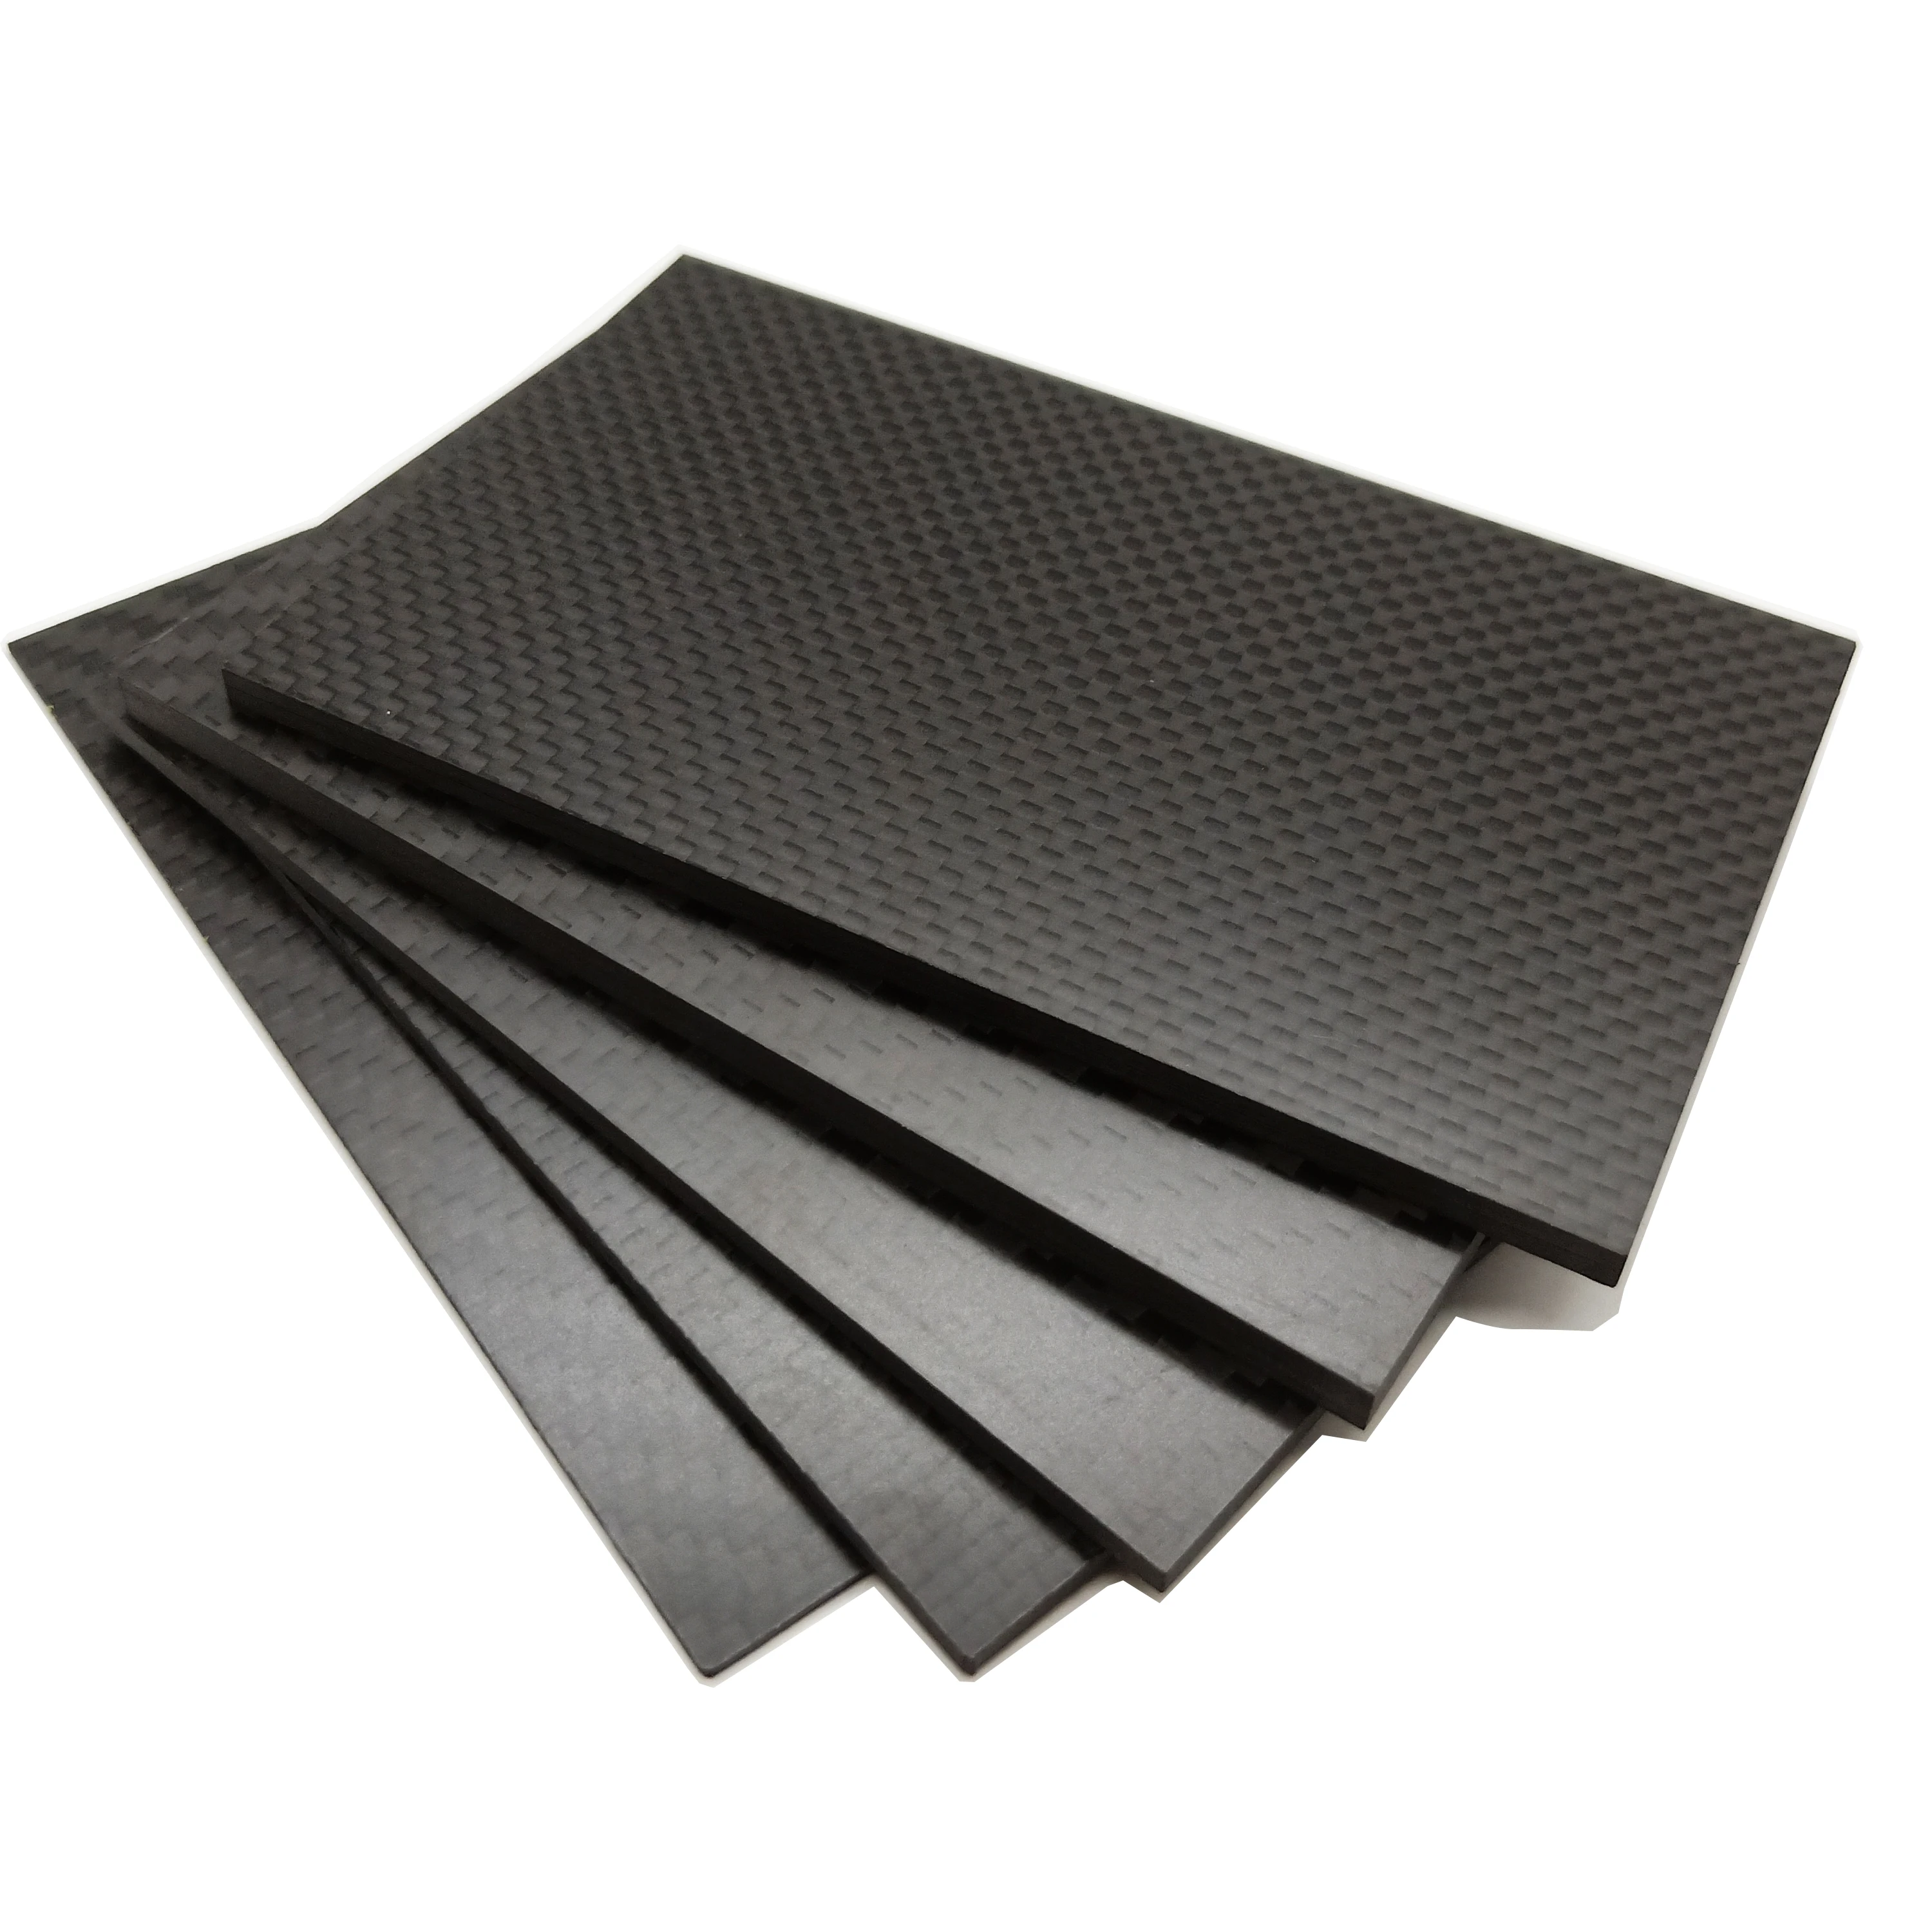 1-5mm thick CL.I GLOSS or MATTE REAL 100% CARBON FIBER sheet plate 300x200mm 